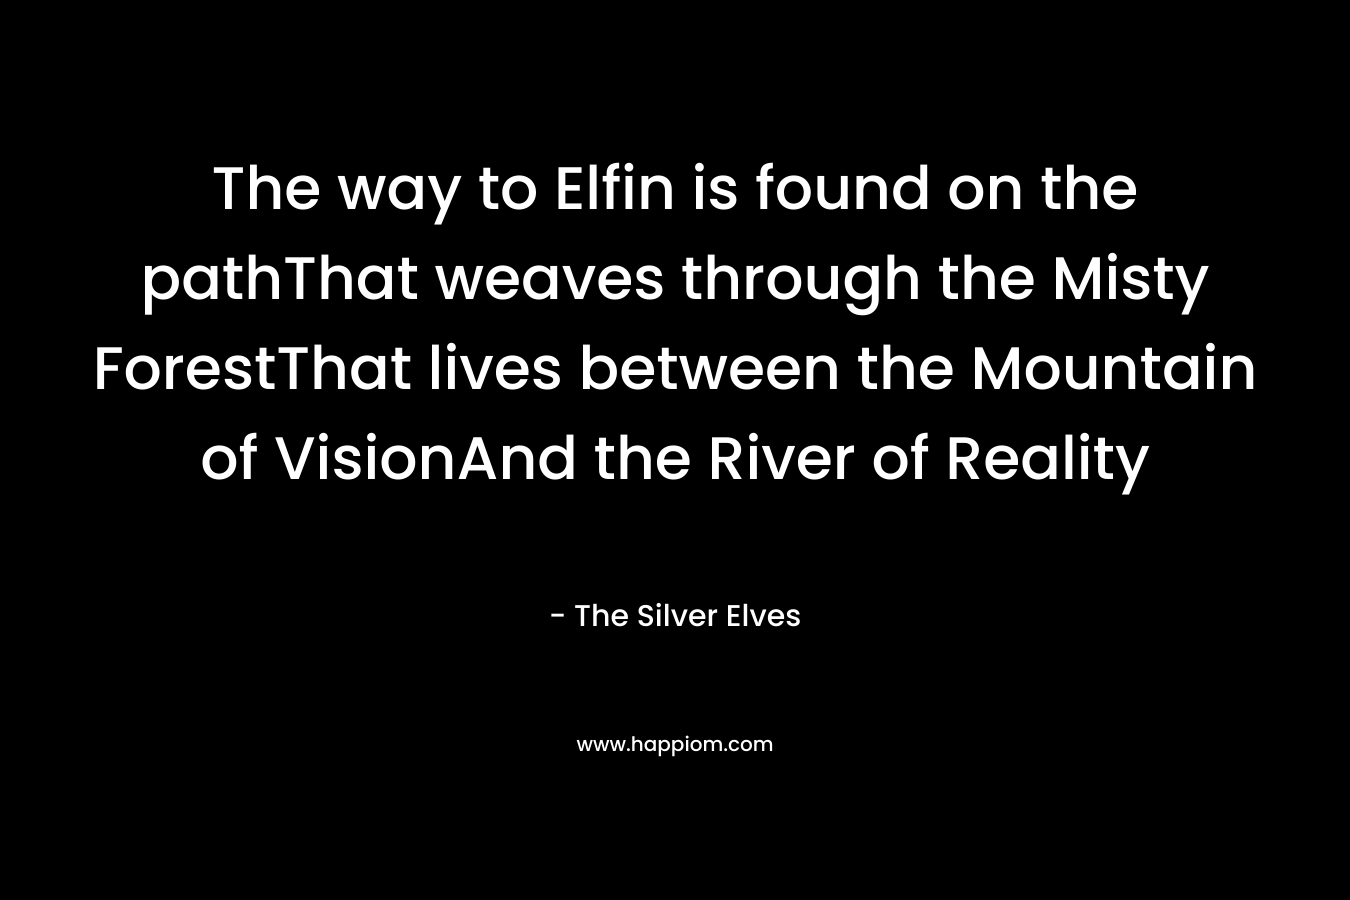 The way to Elfin is found on the pathThat weaves through the Misty ForestThat lives between the Mountain of VisionAnd the River of Reality